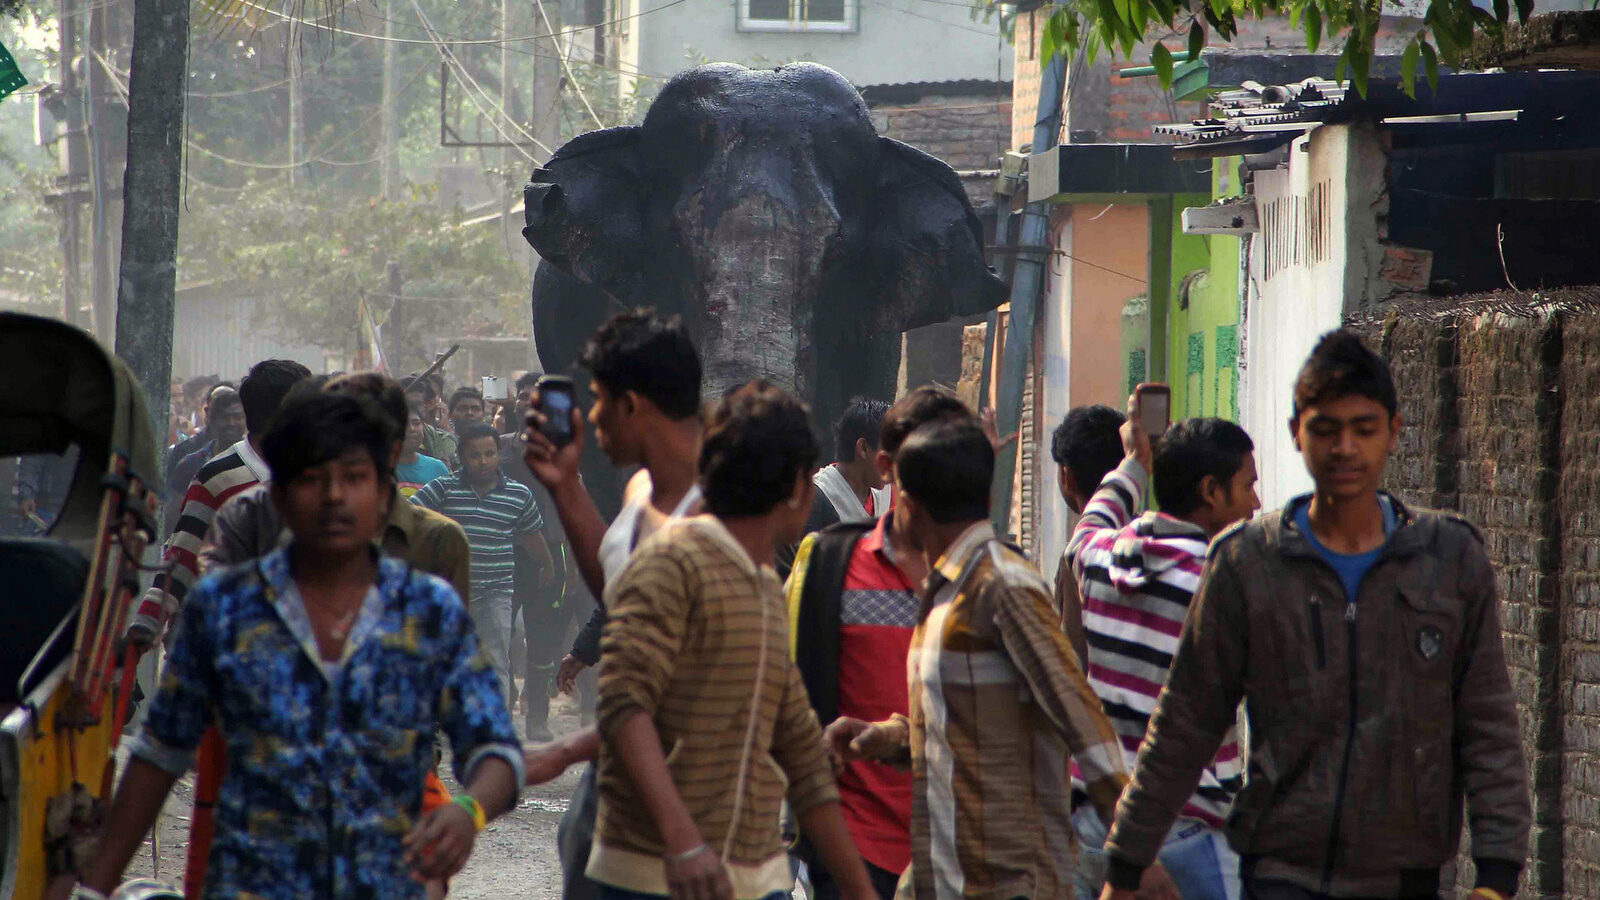 A wild elephant that strayed into the town moves through the streets as people follow at Siliguri in West Bengal state, India, Wednesday, Feb. 10, 2016. The elephant had wandered from the Baikunthapur forest on Wednesday, crossing roads and a small river before entering the town. The panicked elephant ran amok, trampling parked cars and motorbikes before it was tranquilized. (AP Photo)